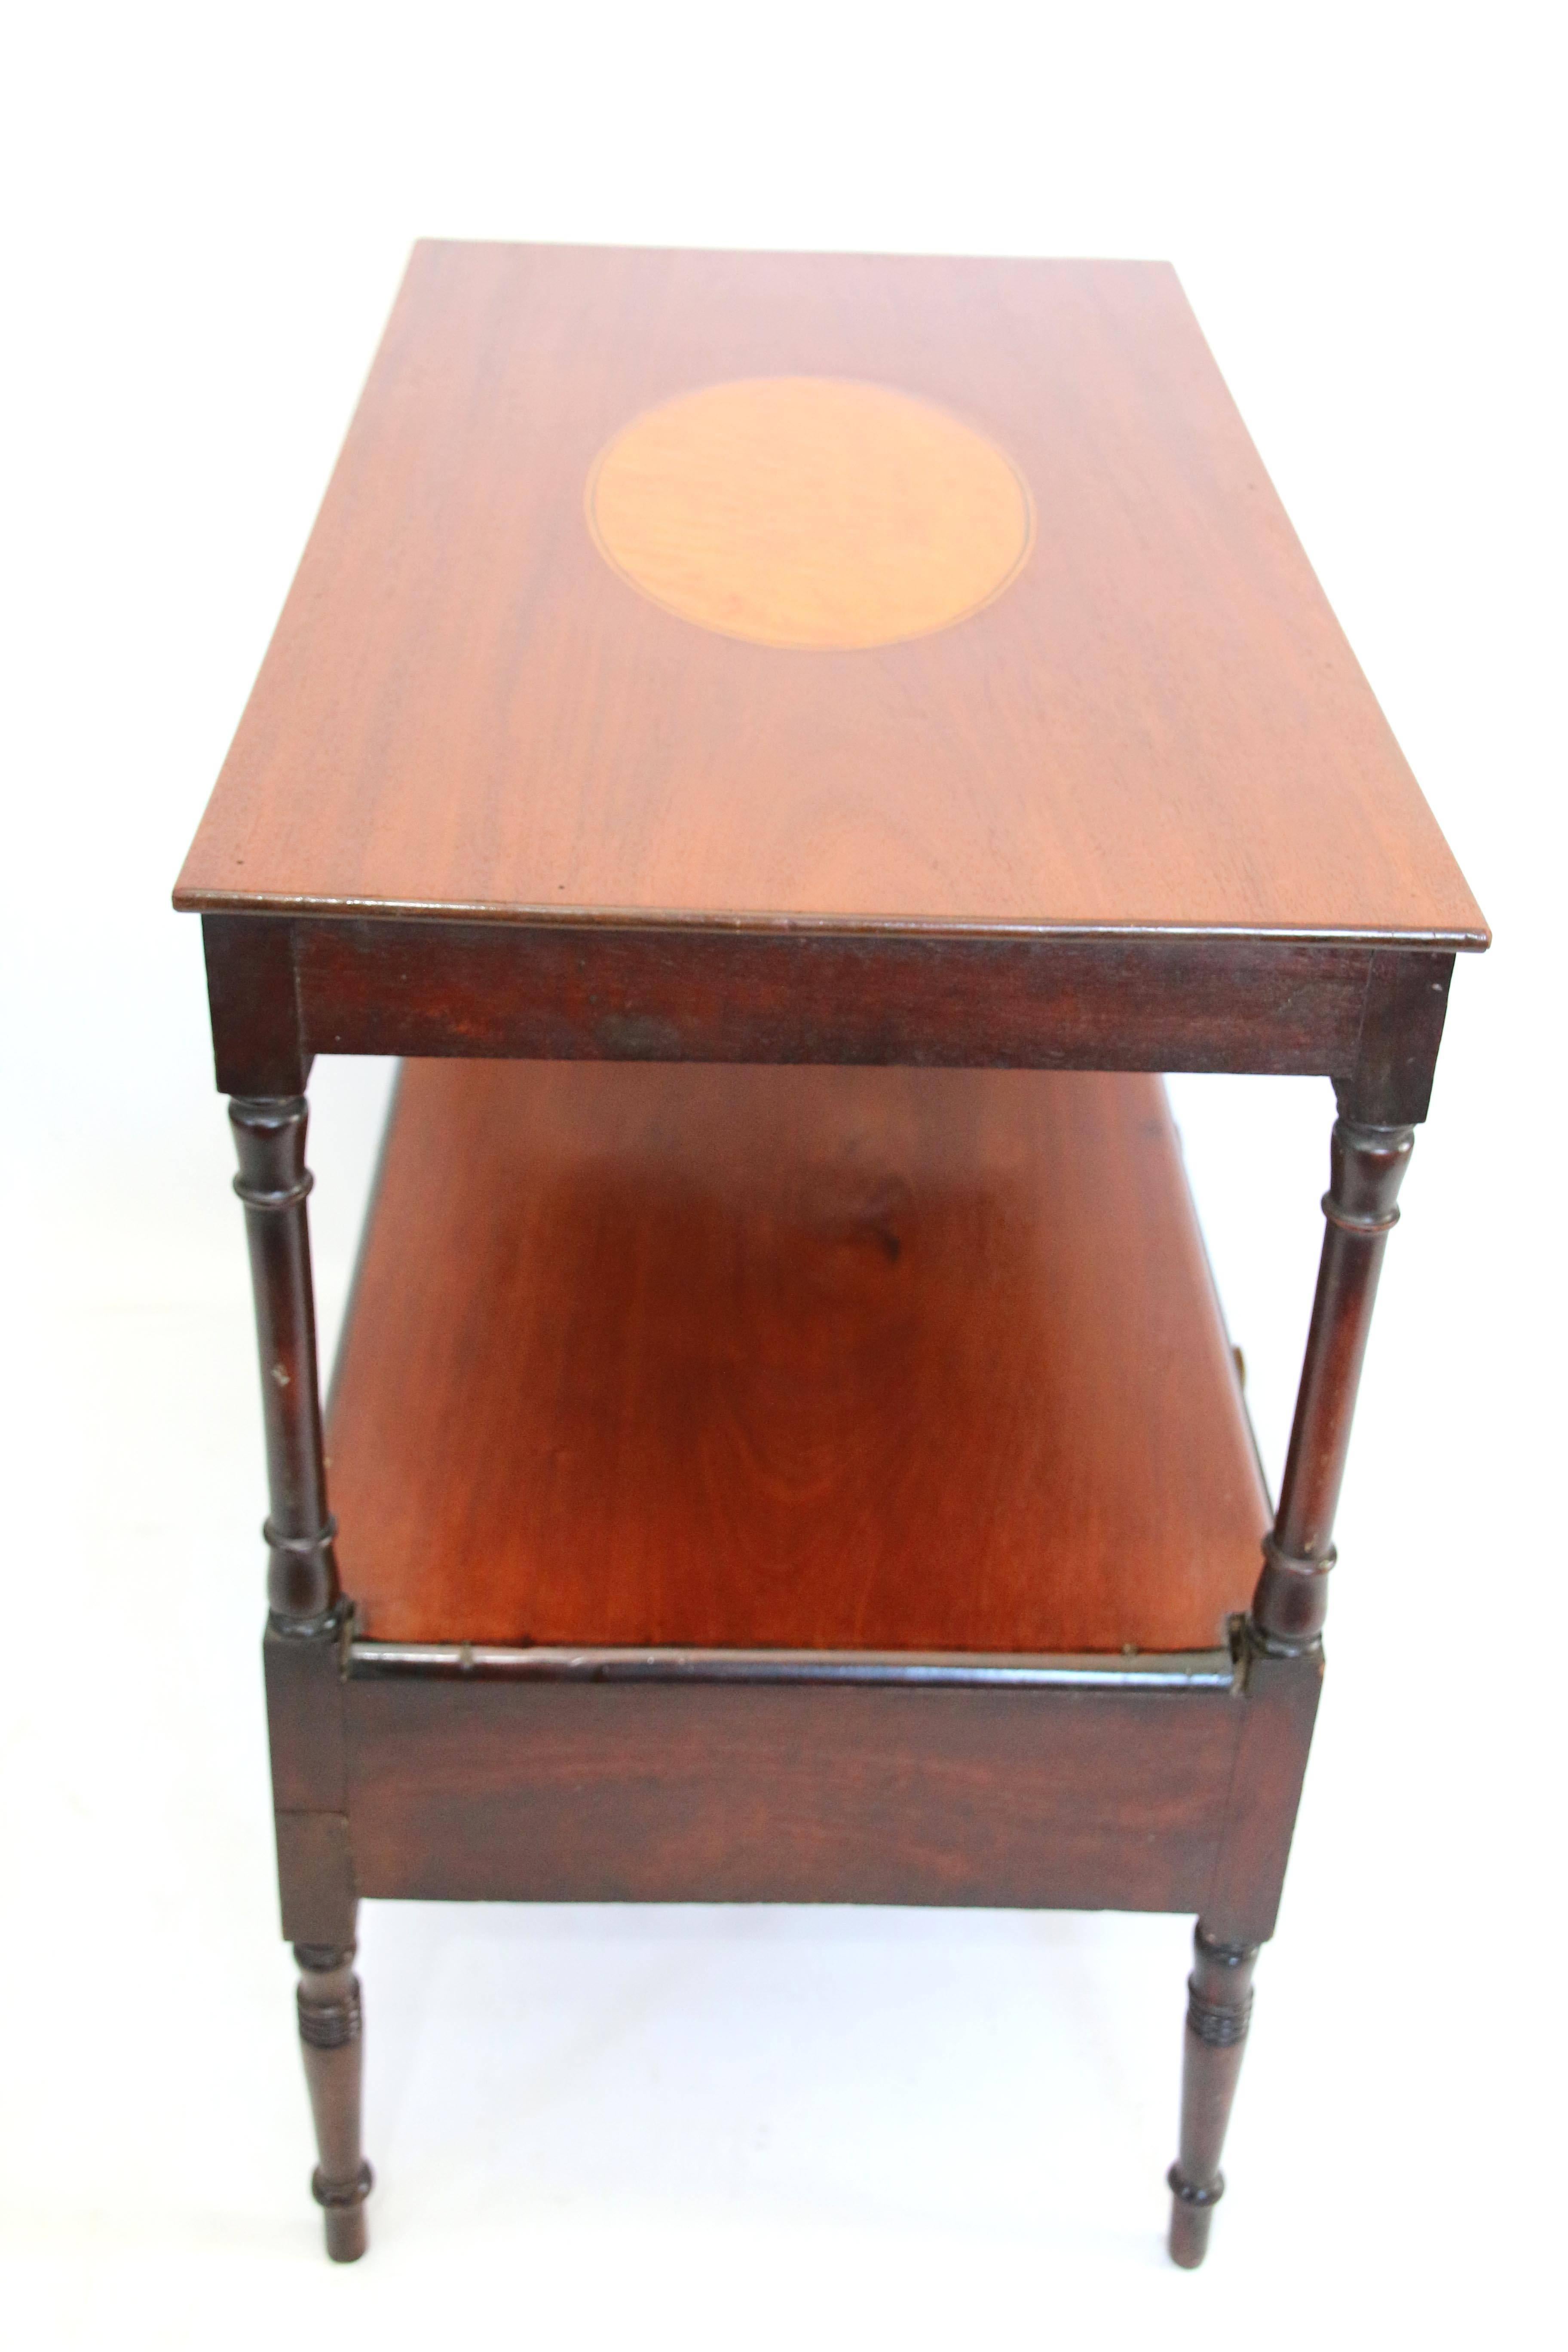 Early 19th Century Sheraton Diminutive Server or Butler's Table For Sale 2